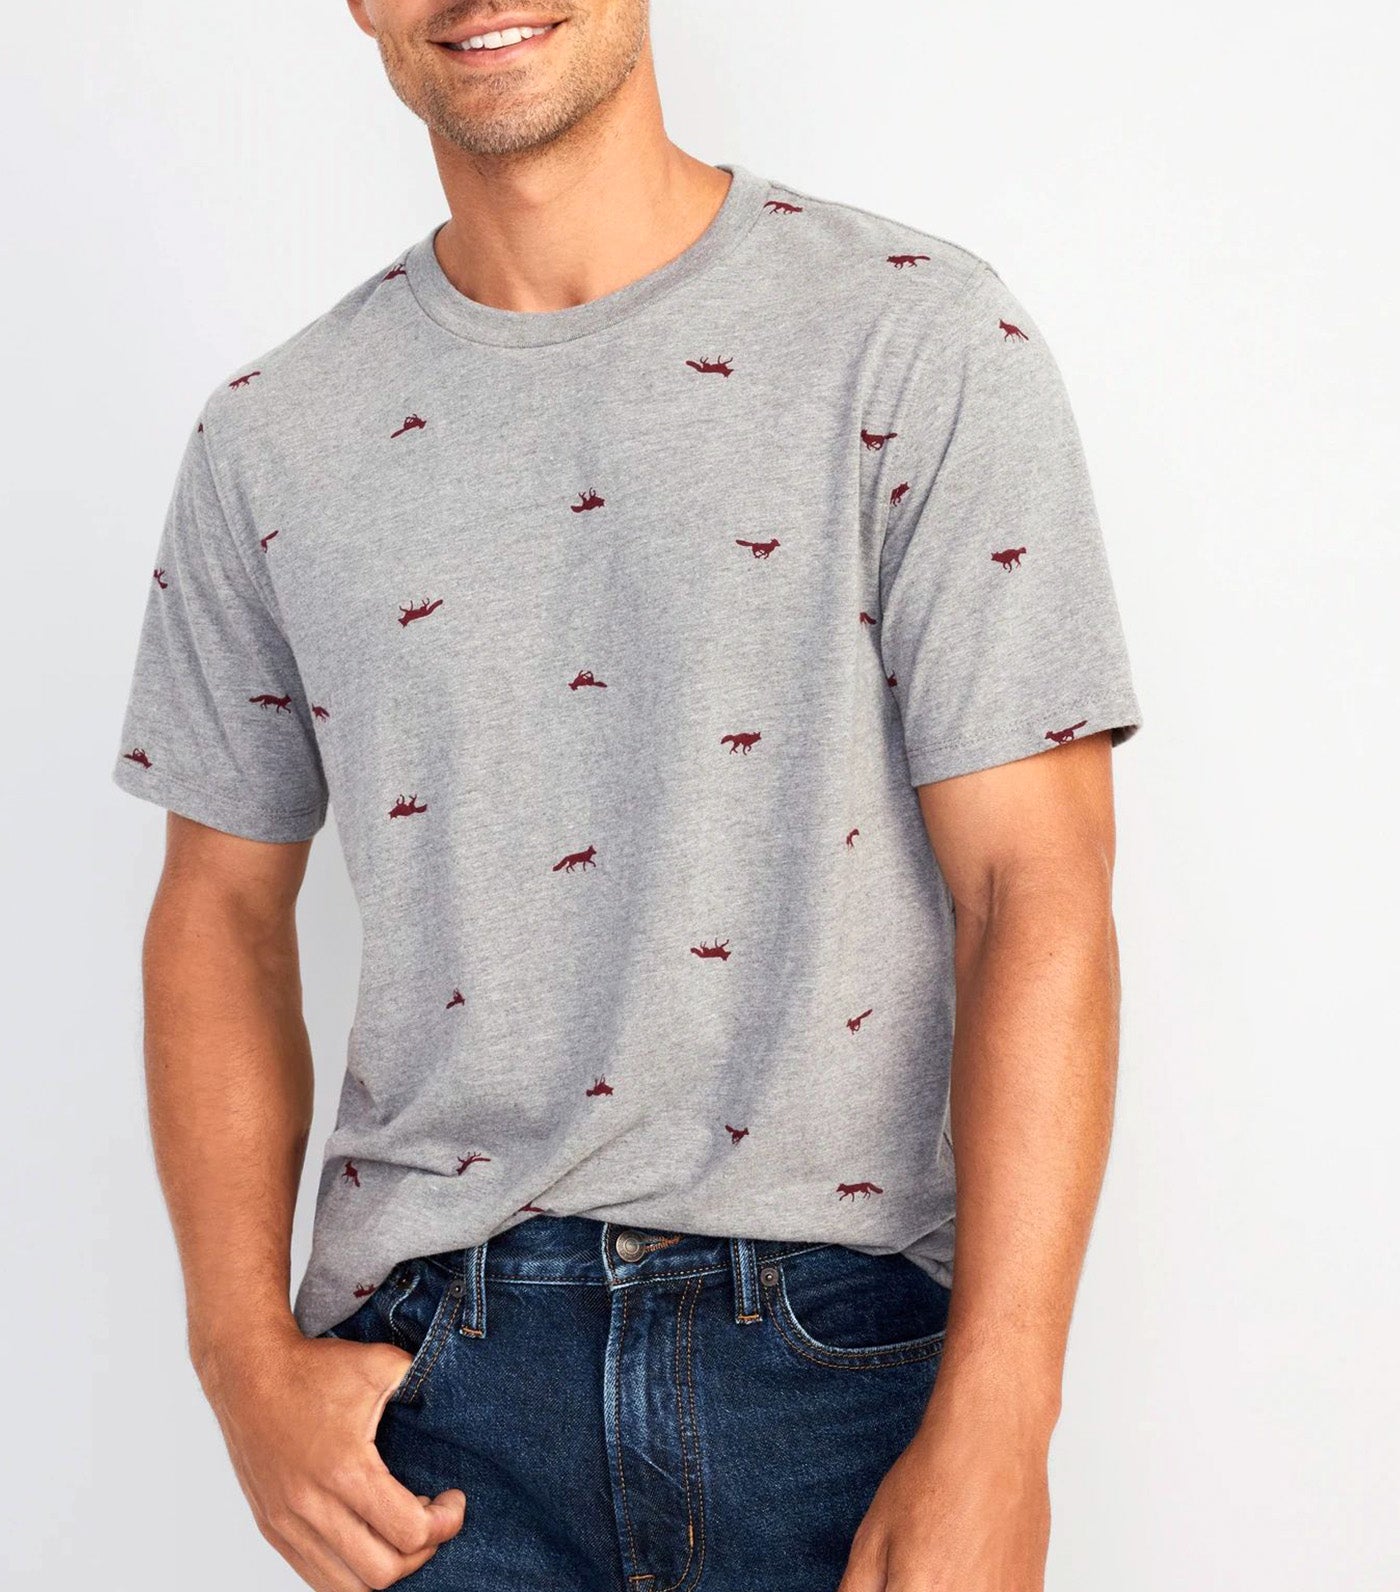 Soft-Washed Printed Crew-Neck T-Shirt for Men Foxes